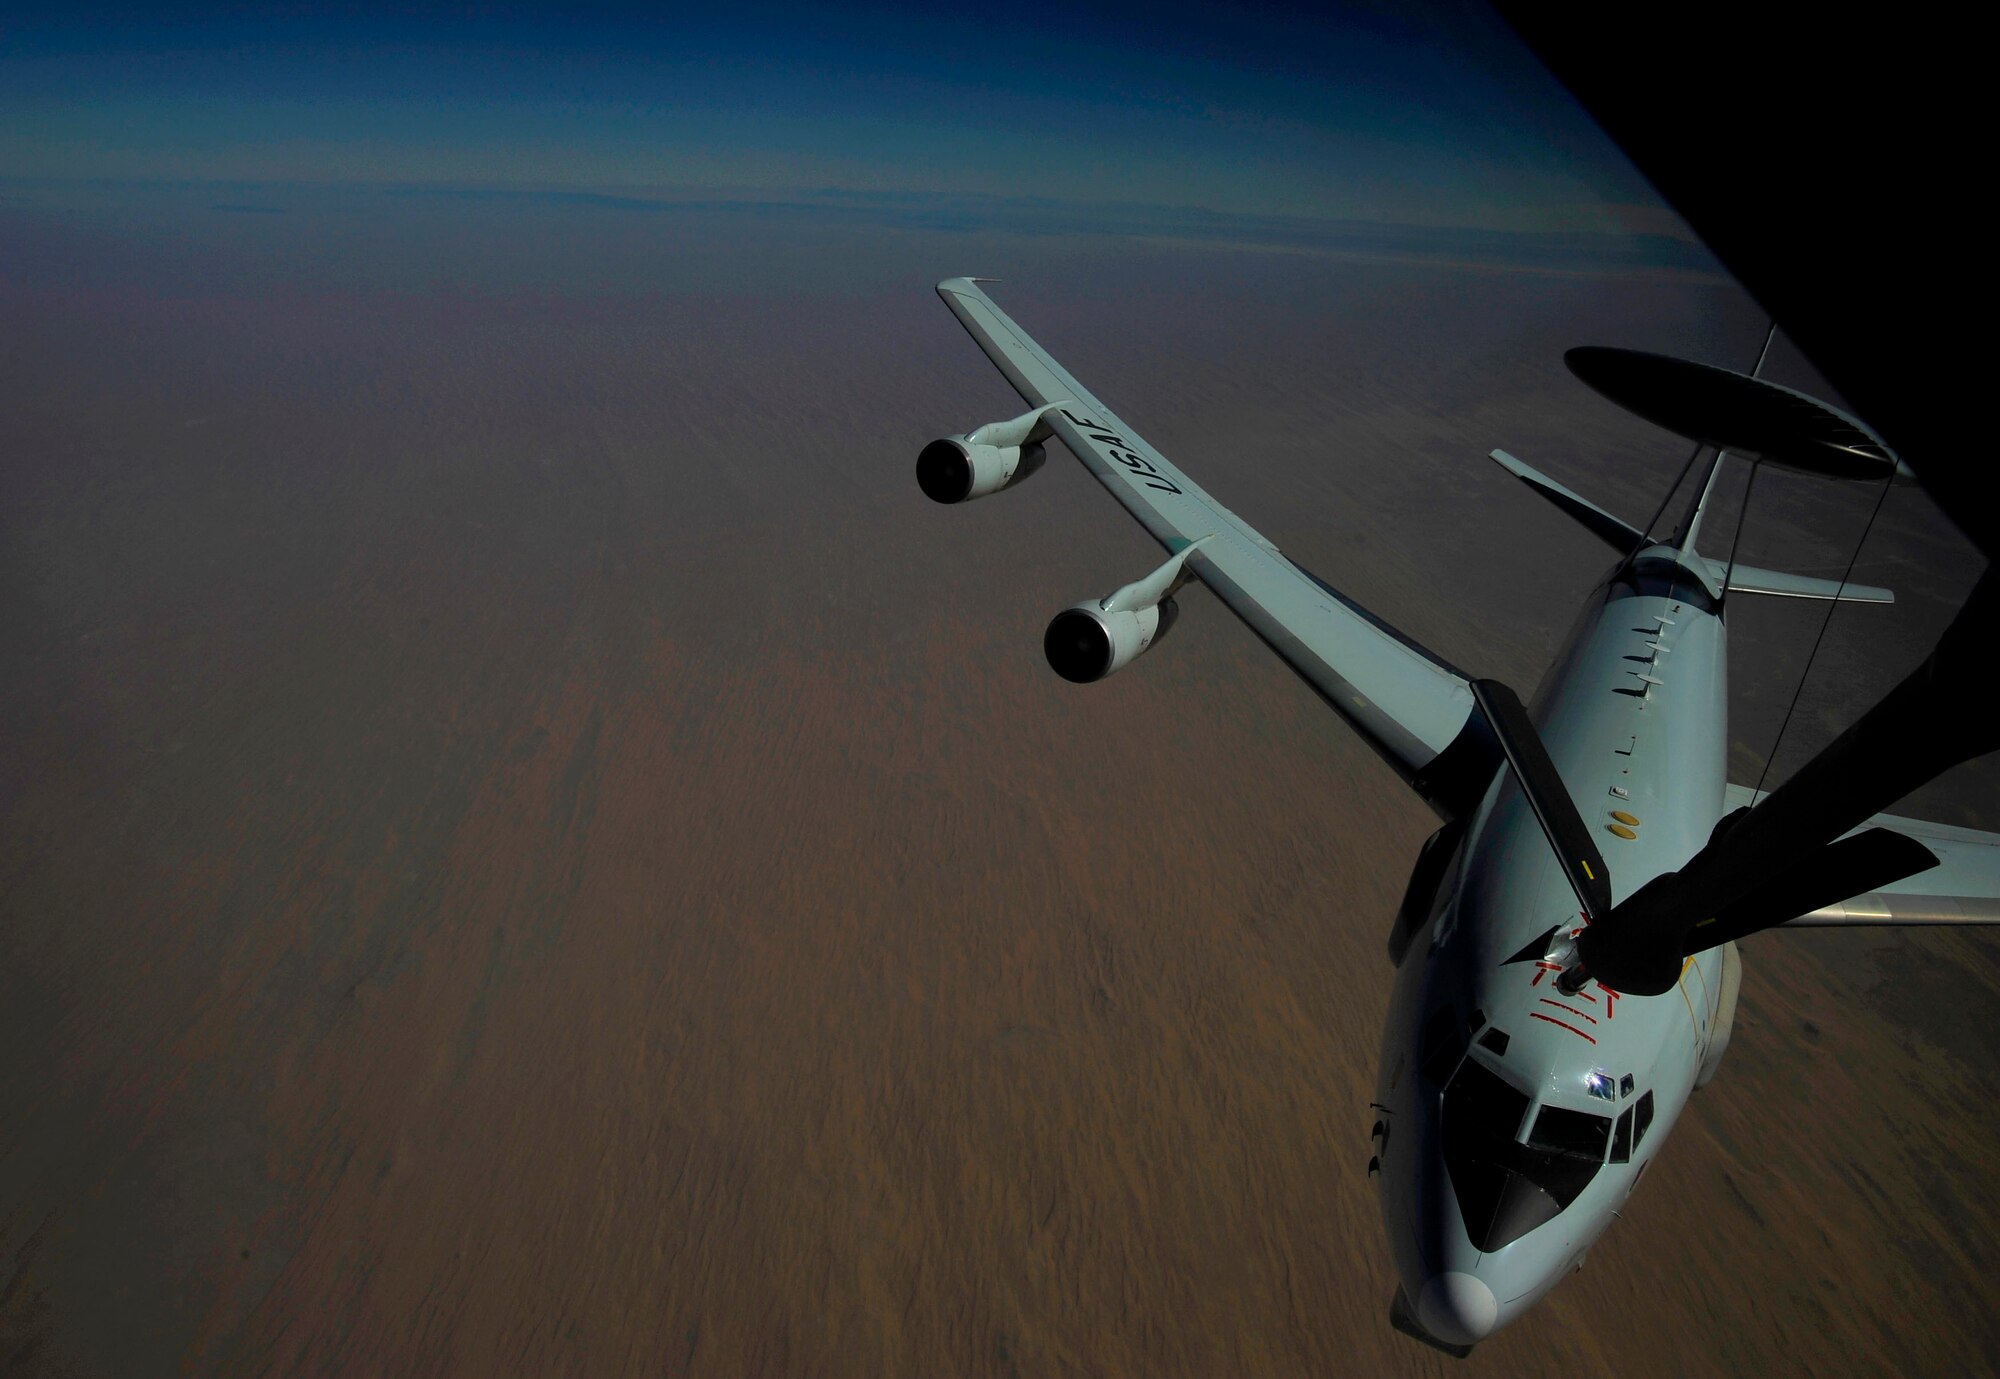 U.S. Air Force Airmen from the 340th Expeditionary Air Refueling Squadron,  refuel an E-3 Sentry, Airborne Warning and Control System (AWACS) aircraft, Jan.15, 2010, over Afghanistan.  The AWACS is an airborne radar system designed to detect and manage aircraft.  The E-3 is used at high altitude and can distinguish between friendly and hostile aircraft from hundreds of miles away. (U.S. Air Force photo/ SSgt Angelita Lawrence/released)